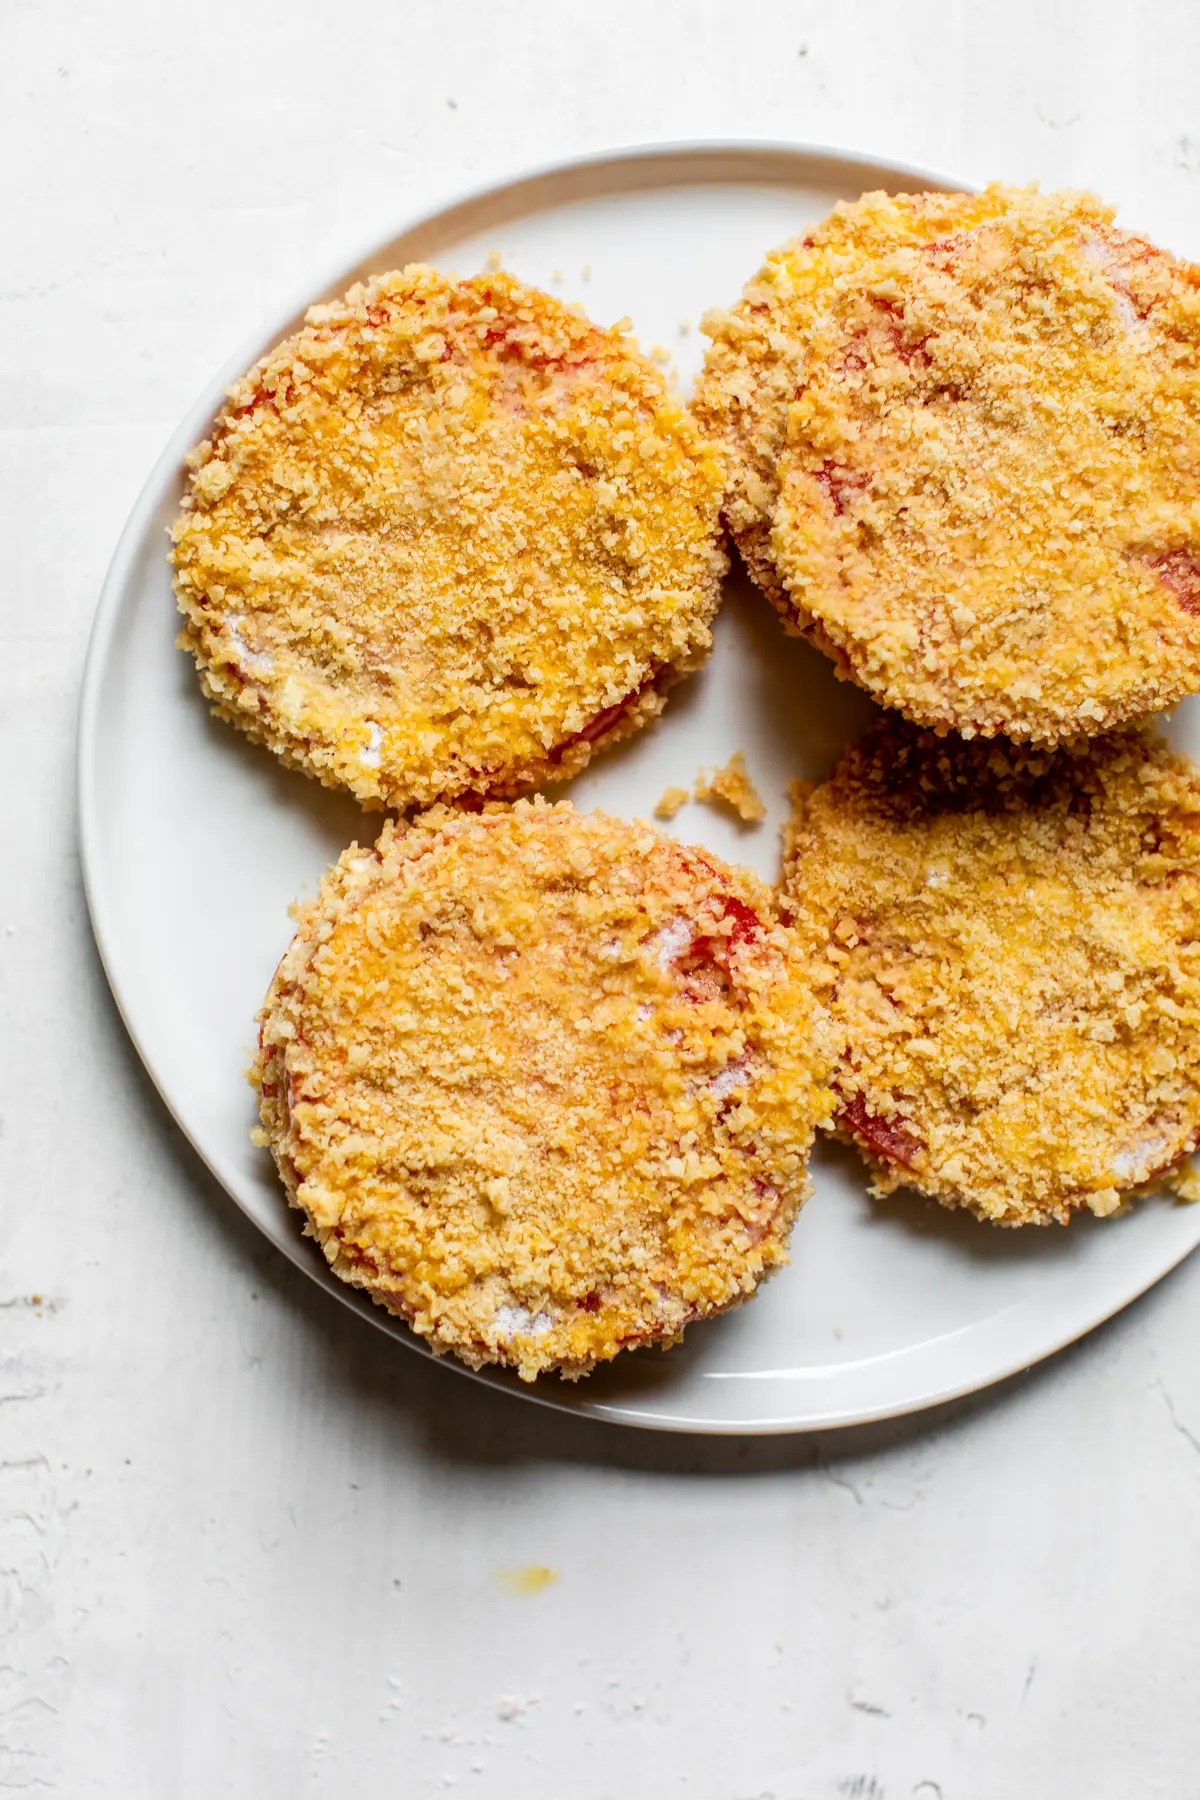 tomato slices dipped in breadcrumbs